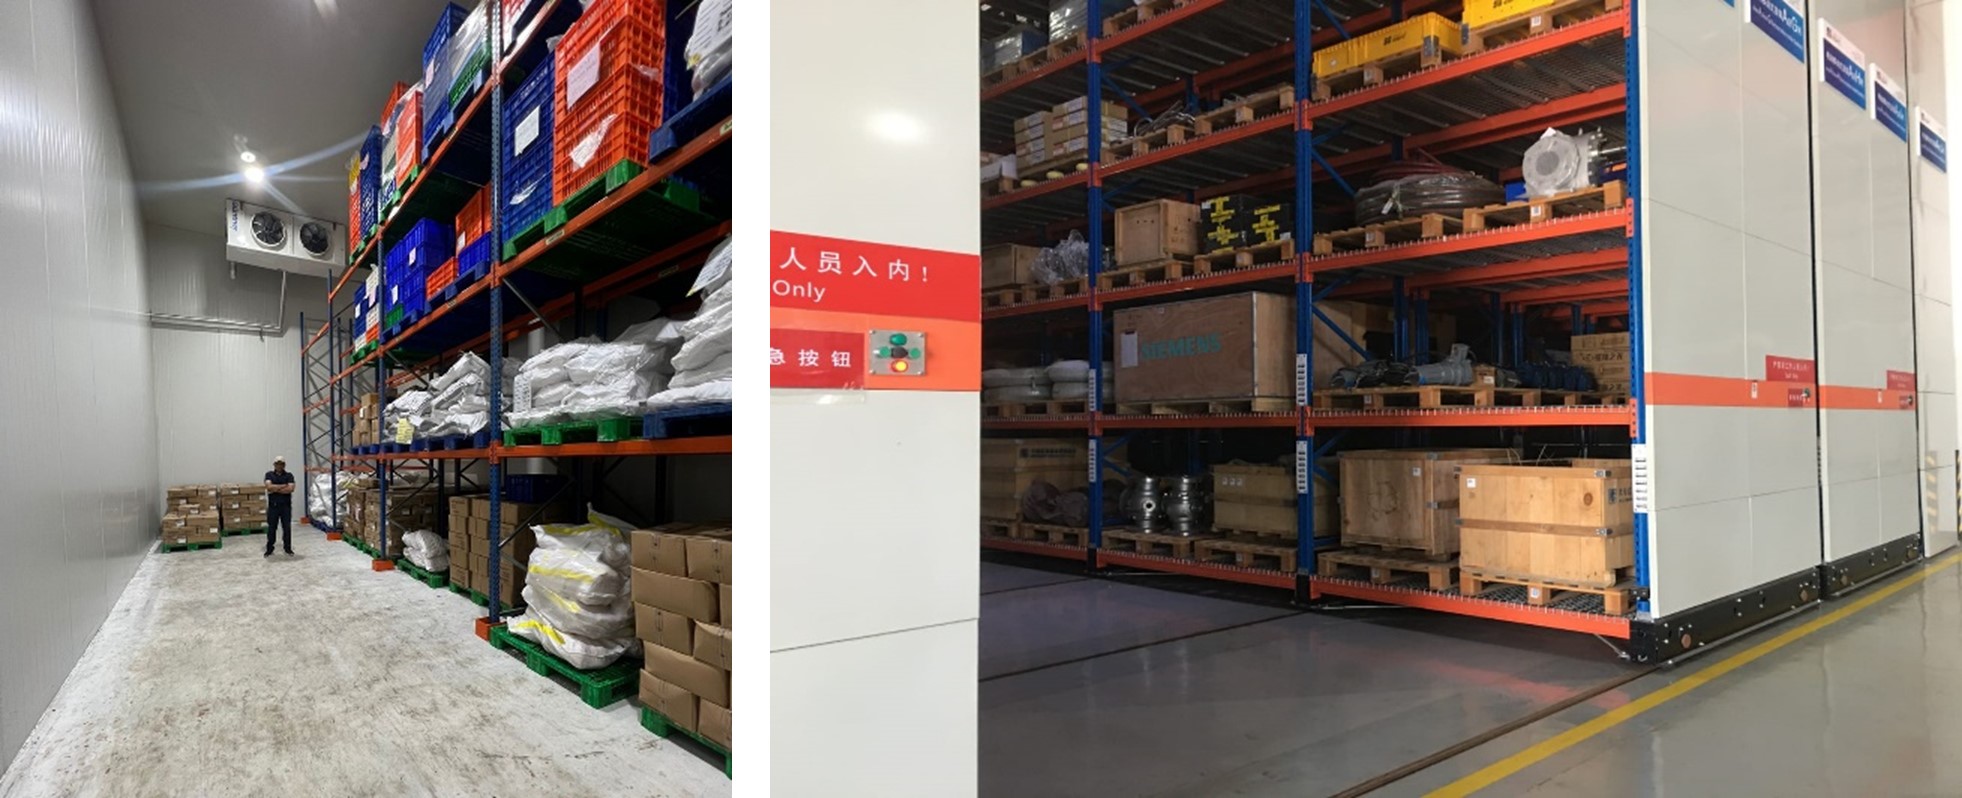 Selective Pallet Racking and Mobile Pallet Rack